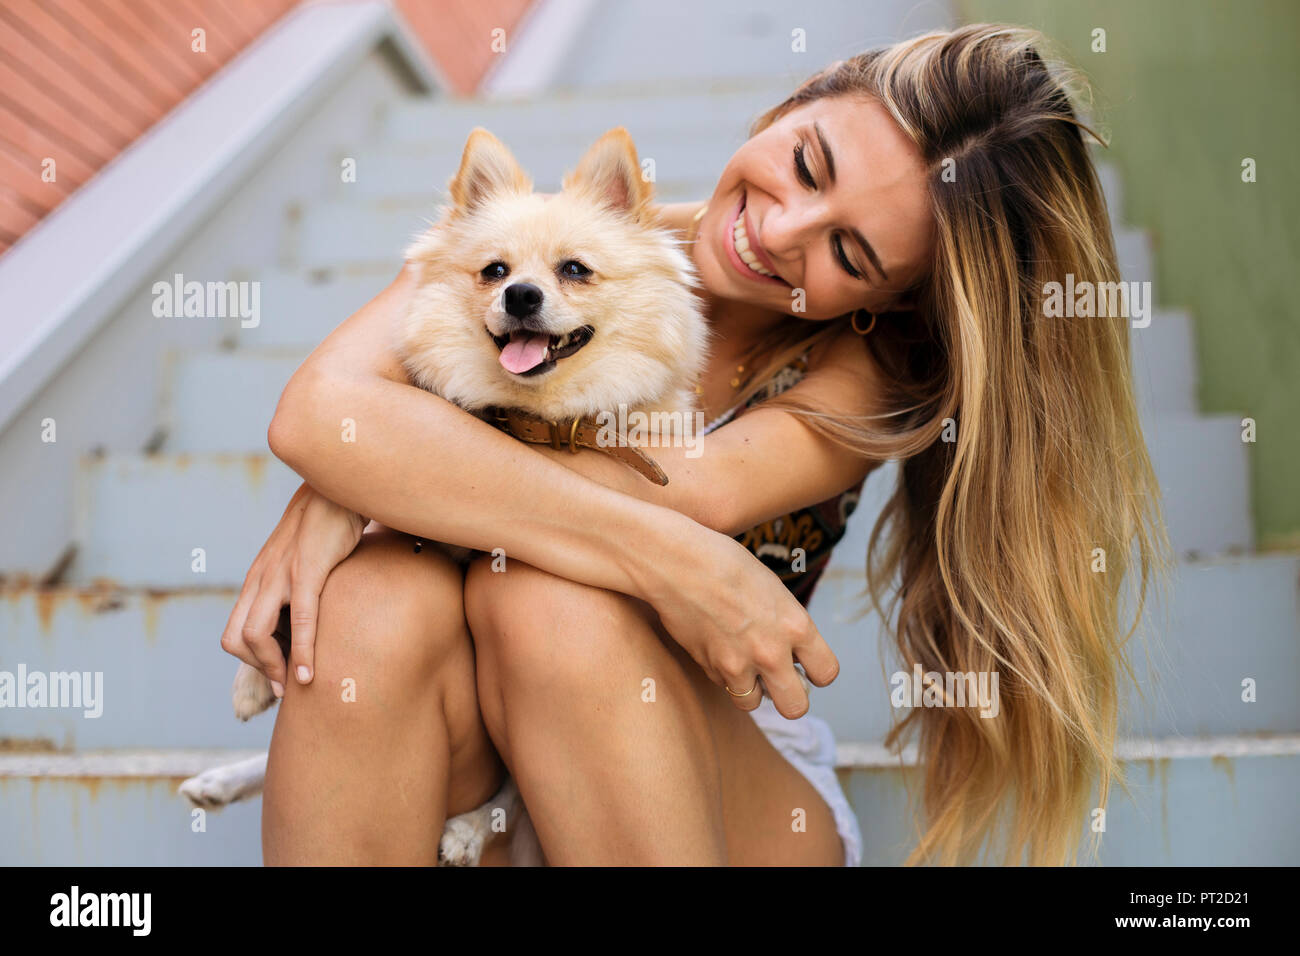 Smiling young woman sitting on stairs holding her dog Stock Photo